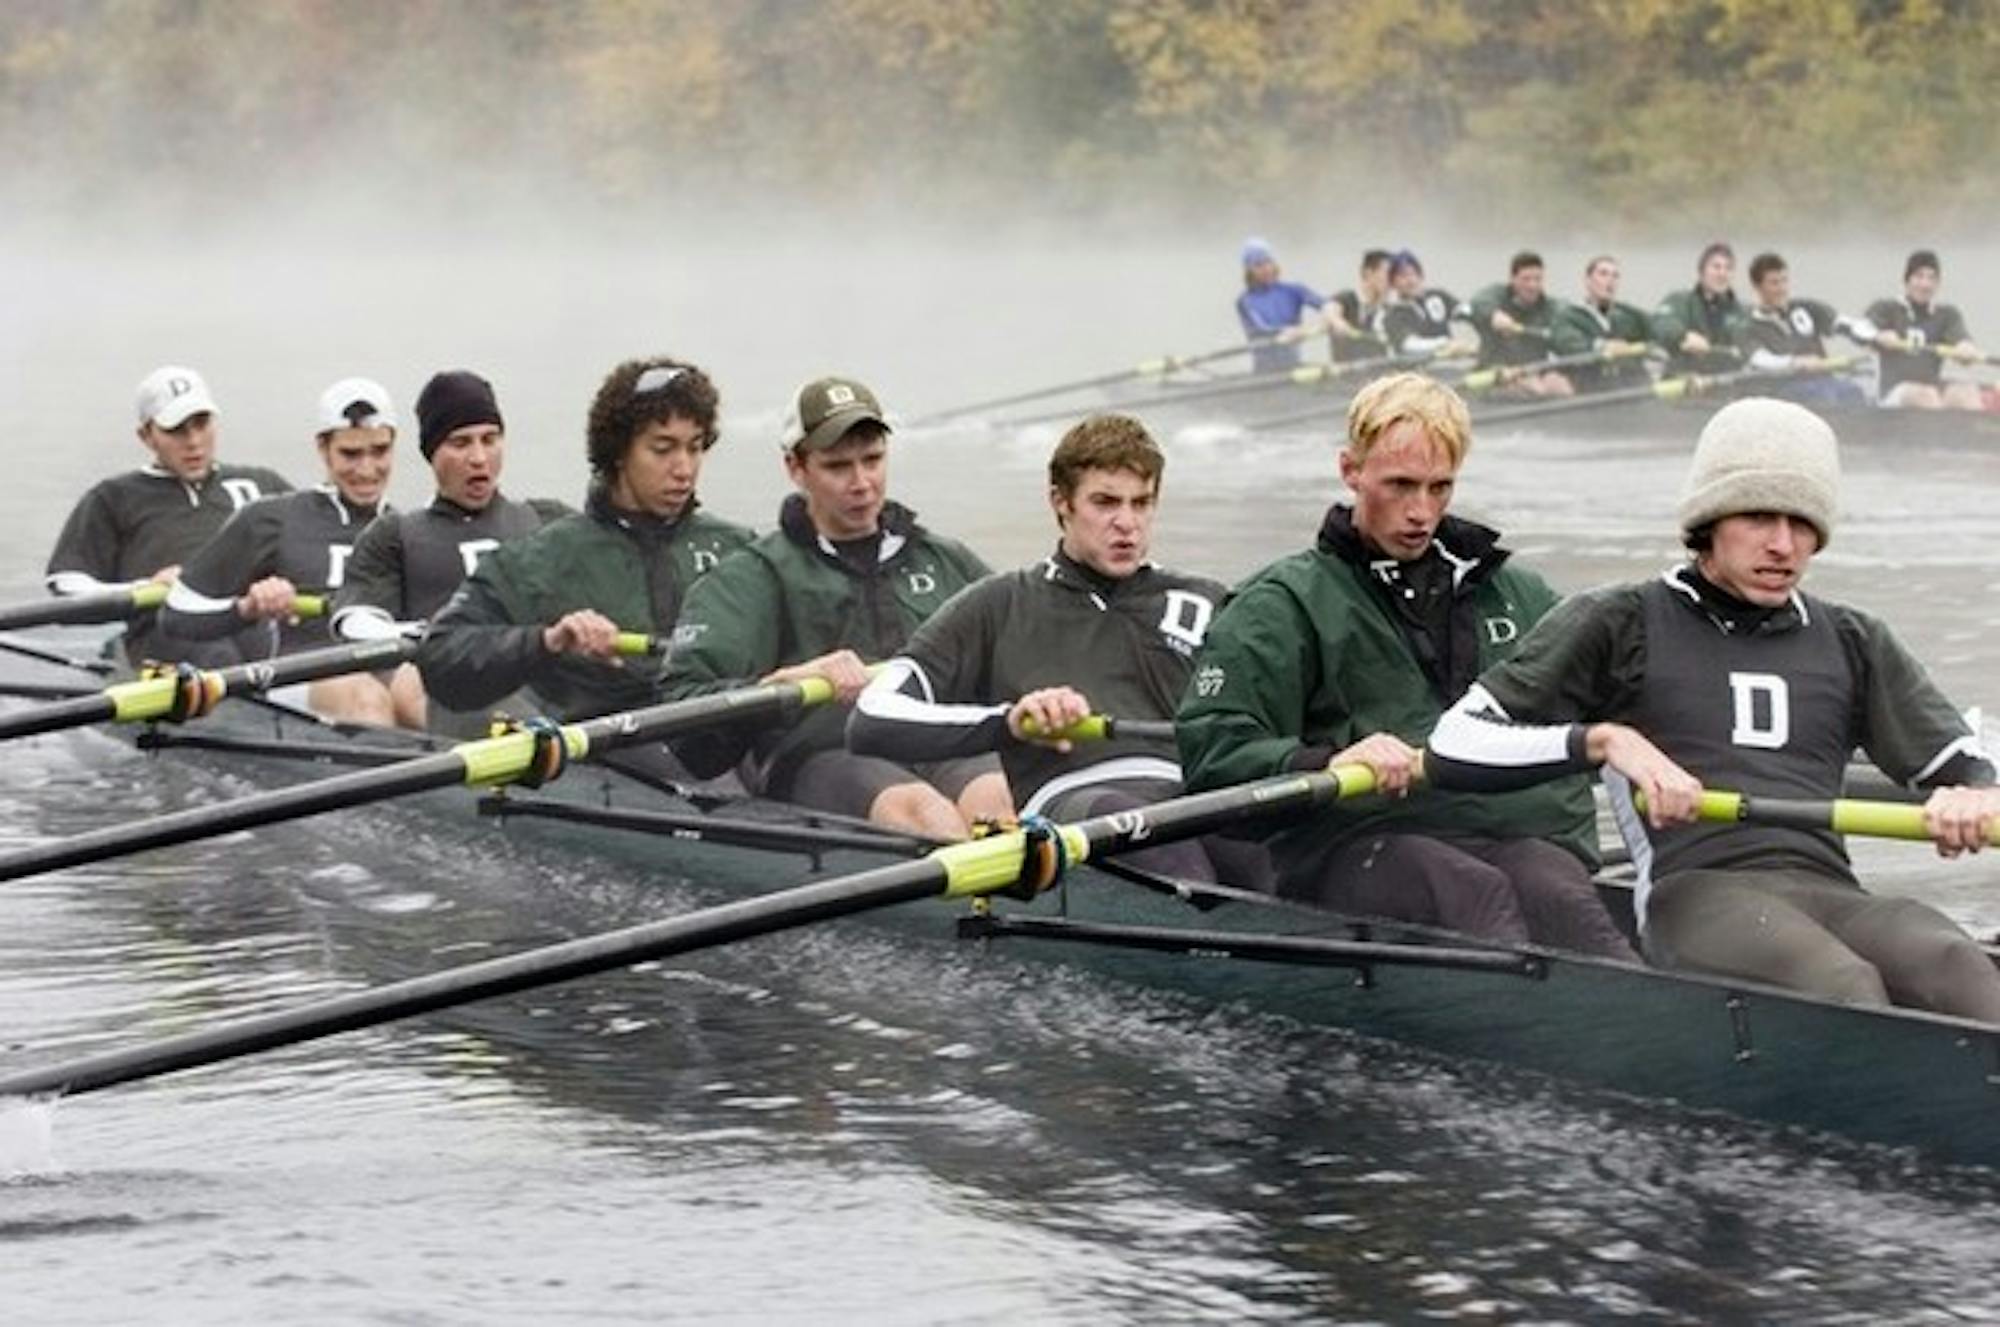 Crew rowed through windy, choppy conditions at Princeton. The teams' finishes didn't warm any hearts.